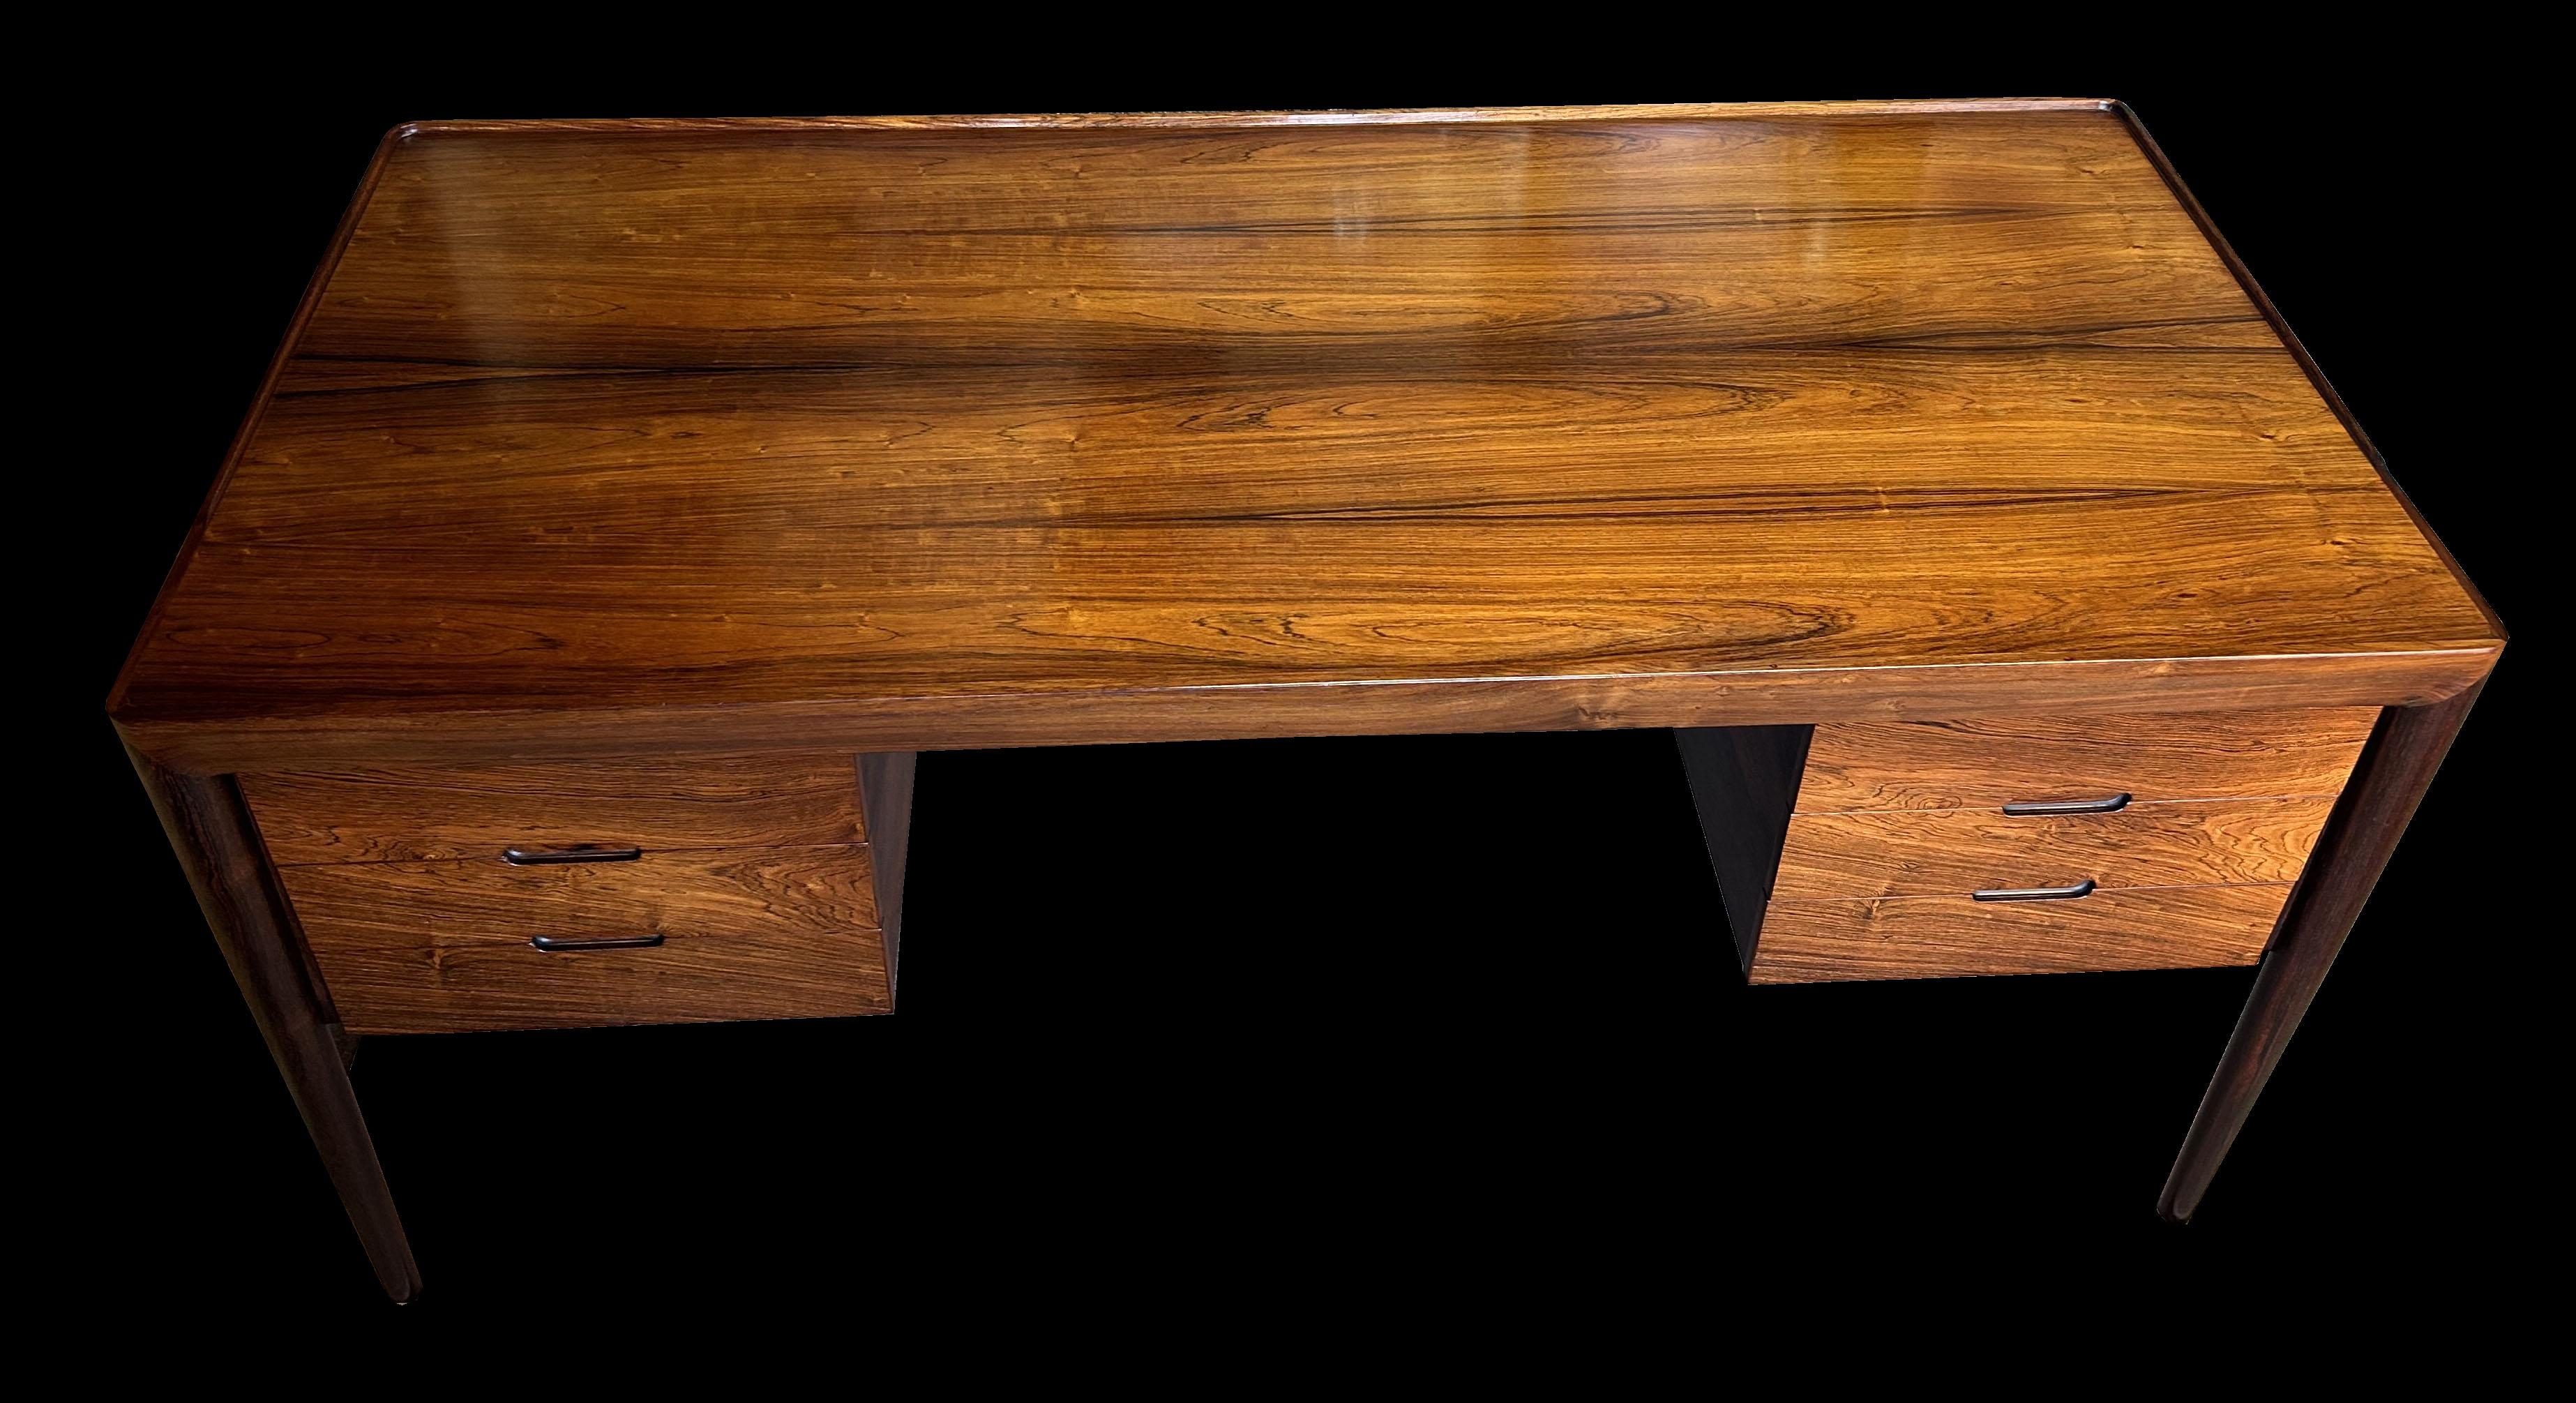 This is a particularly nicely grained Santos Rosewood as, hopefully, the photos show and it's in very good original condition, designed by Erik Riisager Hansen and produced by Haslev Mobelsnedkeri in Denmark during the 1950's.
Santos Rosewood or Pau